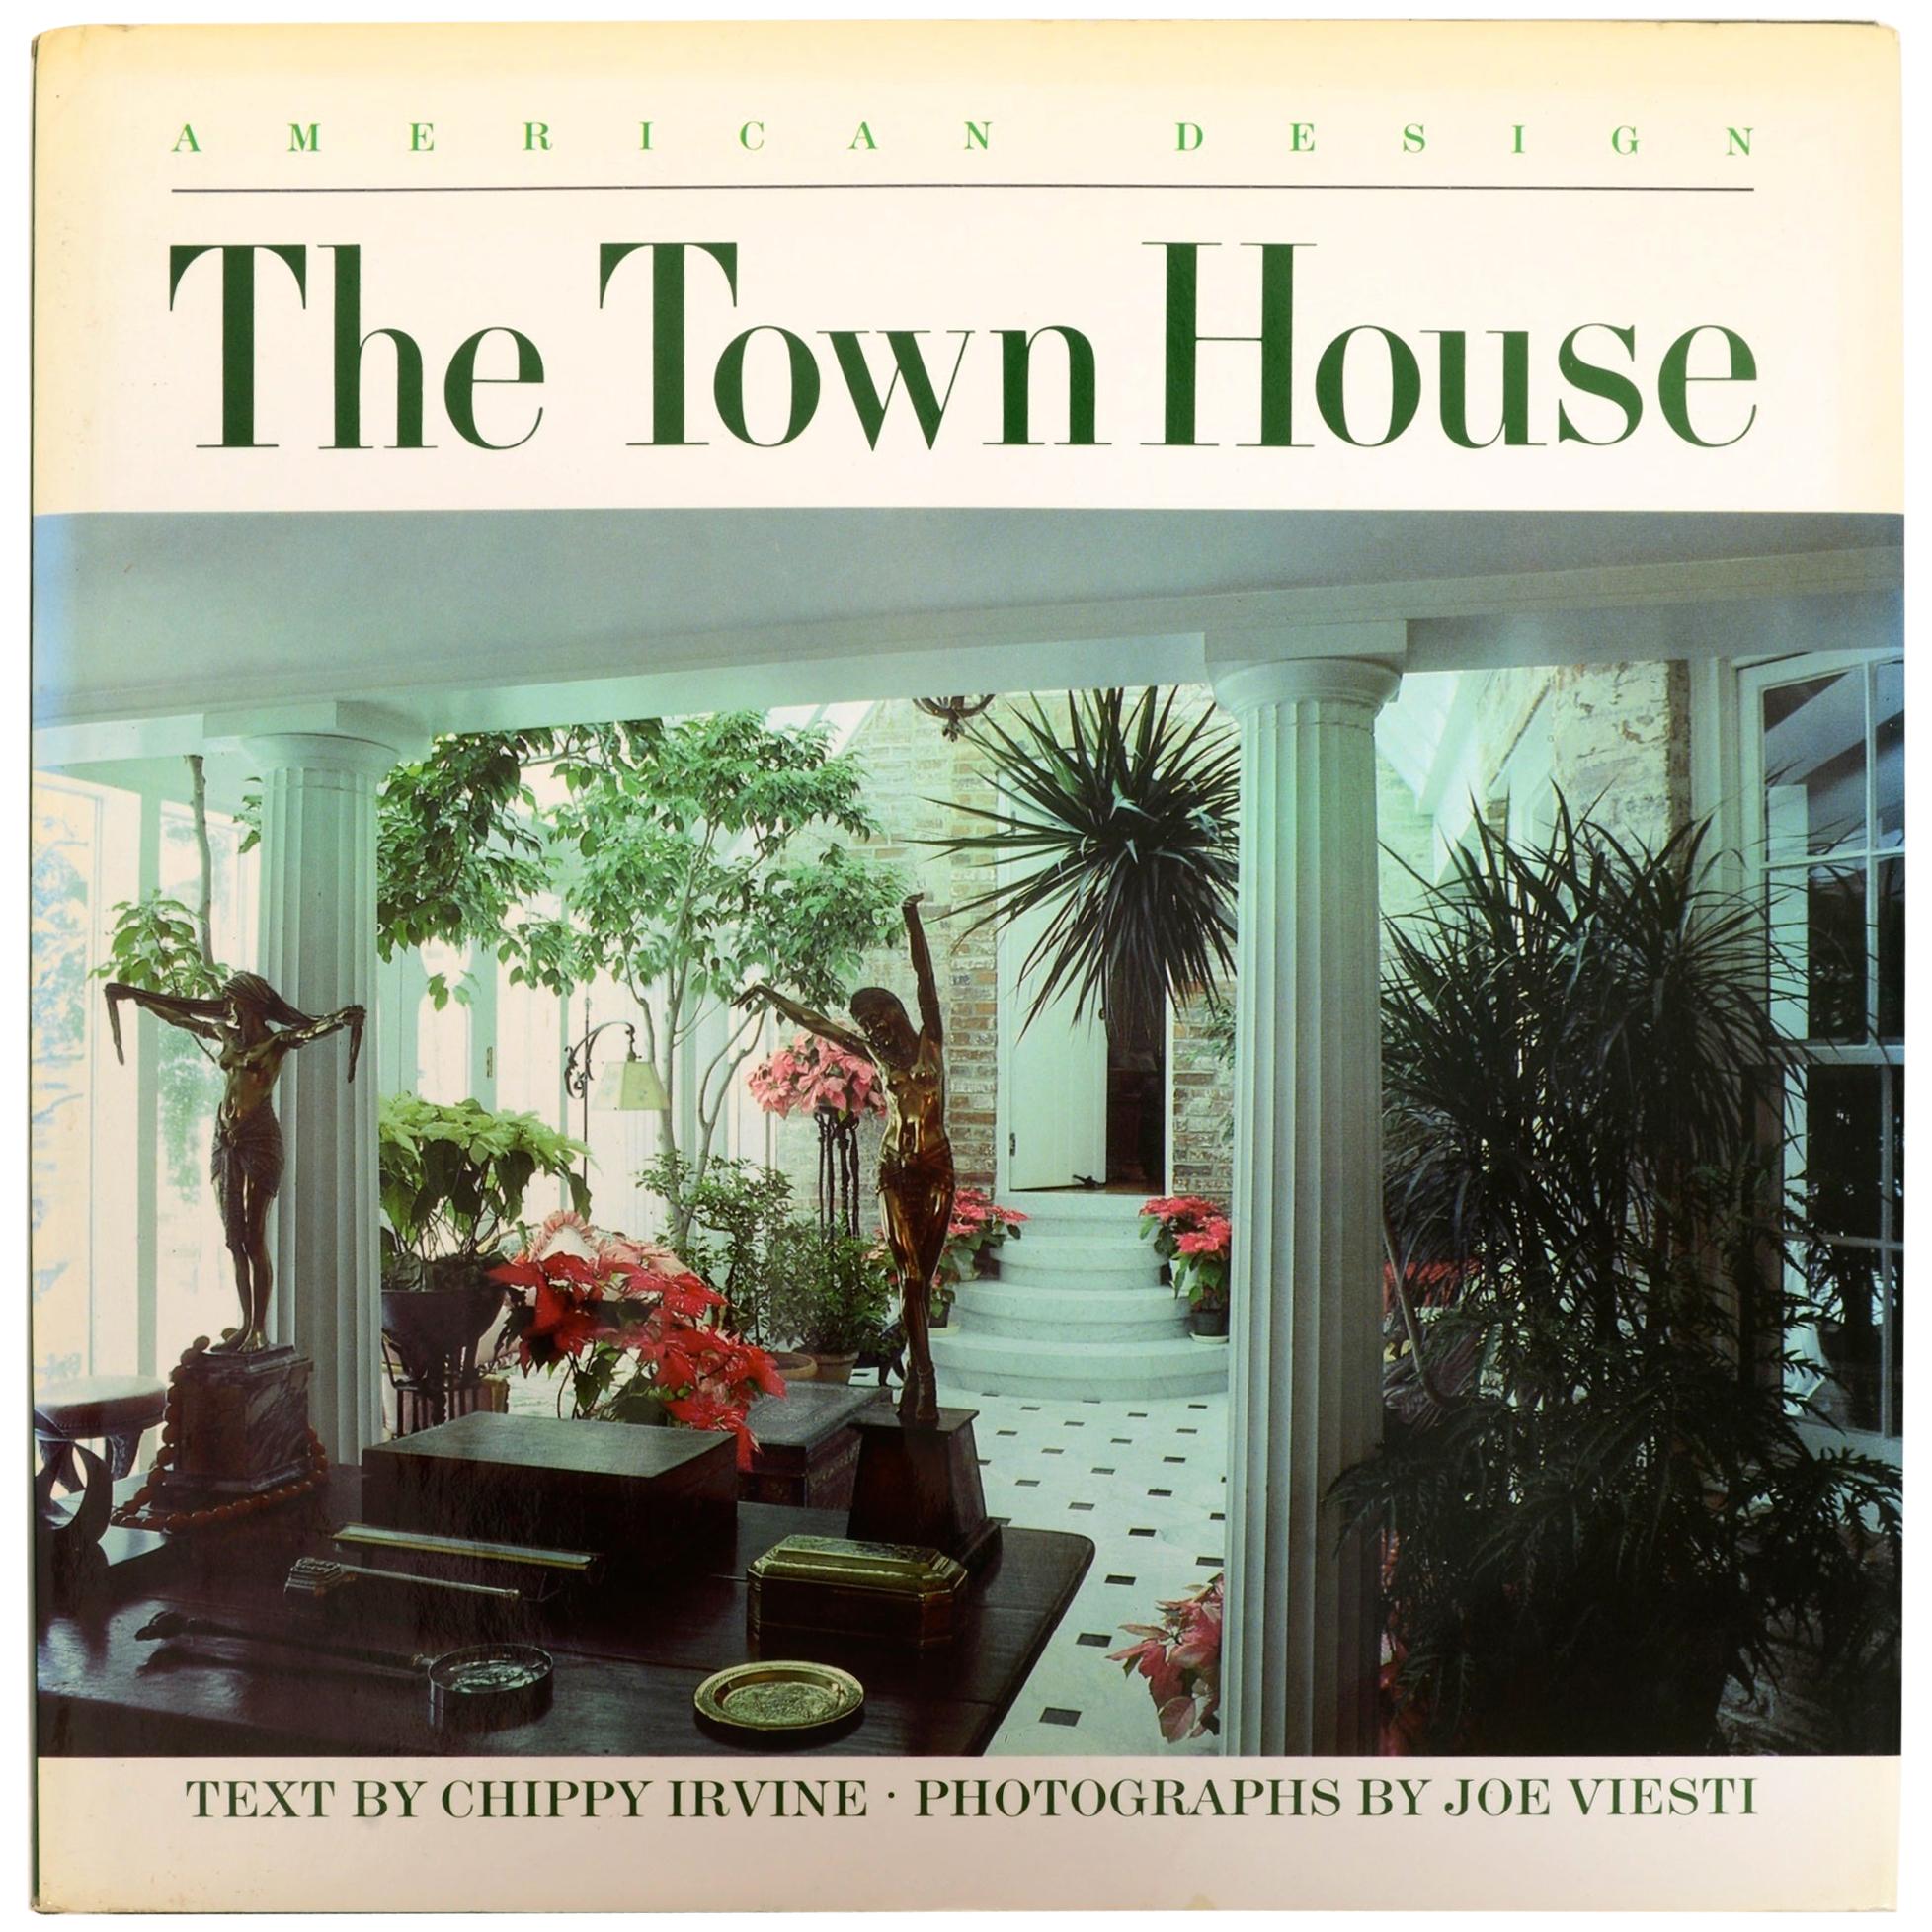 The Town House American Design Series by Chippy Irvine, 1st Ed For Sale